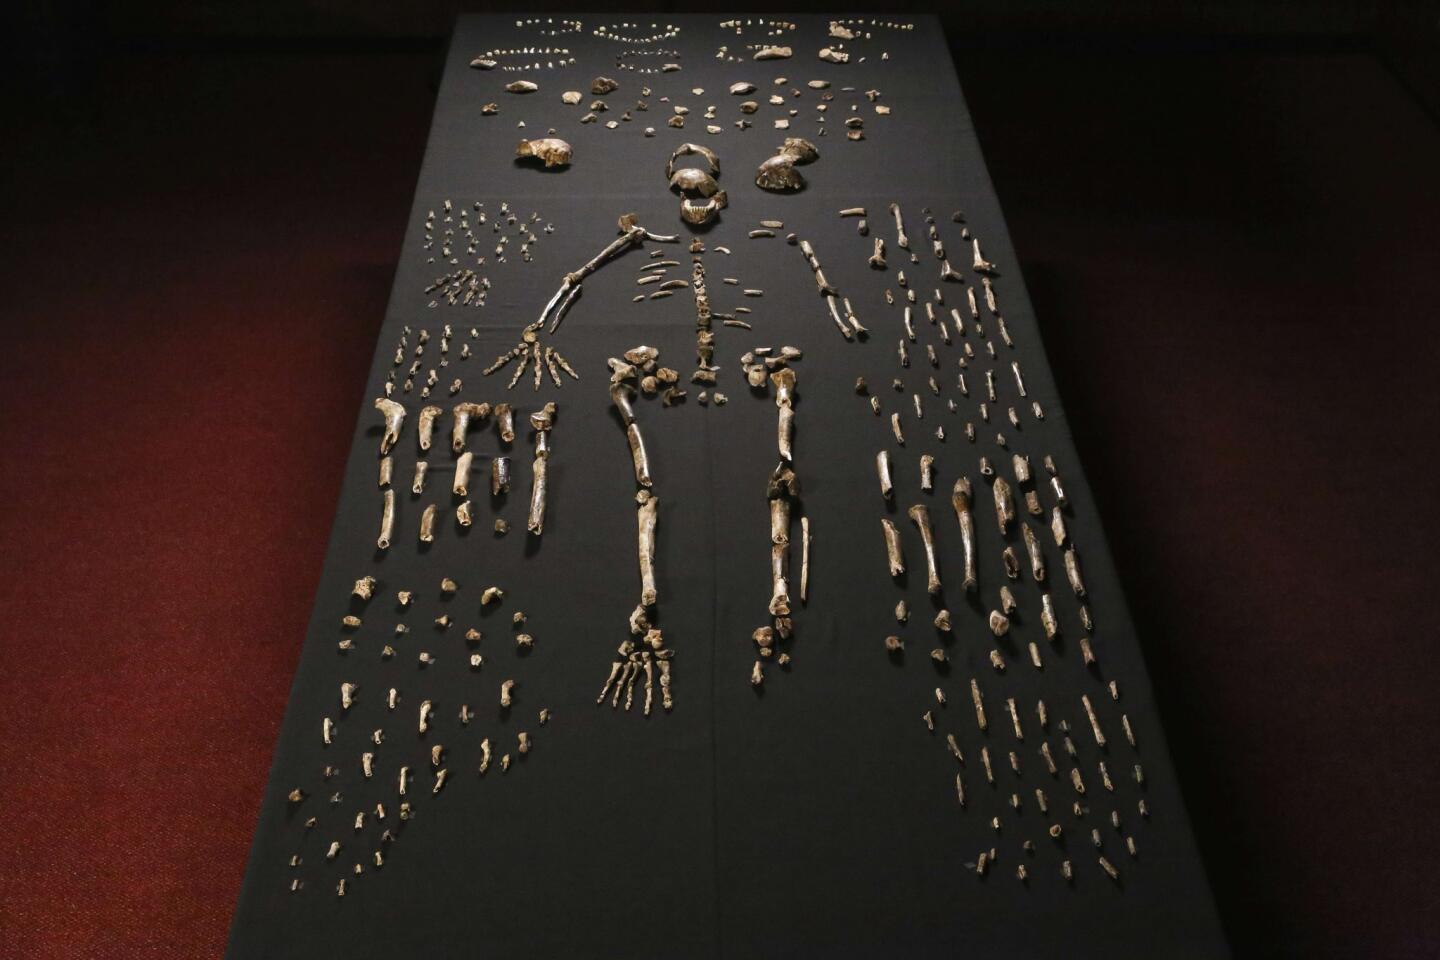 The skeleton of Homo naledi is seen in the Wits bone vault at the Evolutionary Studies Institute at the University of the Witwatersrand in Johannesburg, South Africa. The fossils are among nearly 1,700 bones and teeth retrieved from a nearly inaccessible cave near Johannesburg. The fossil trove was created, scientists believe, by Homo naledi repeatedly secreting the bodies of their dead companions in the cave.